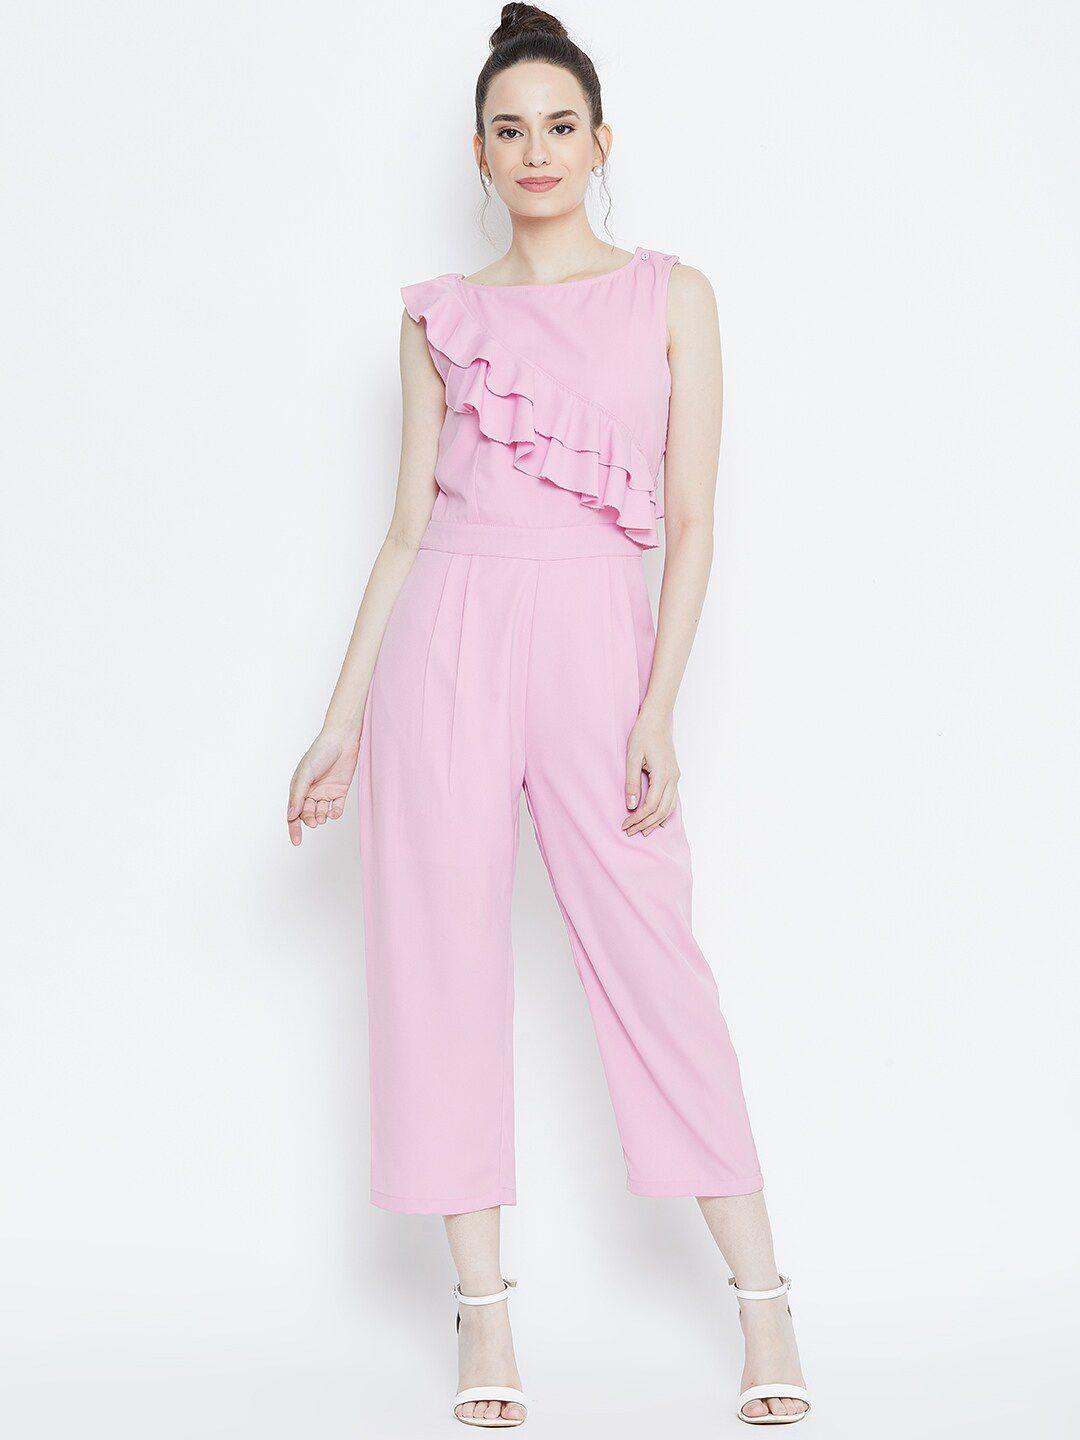 dodo-&-moa-pink-culotte-jumpsuit-with-ruffles